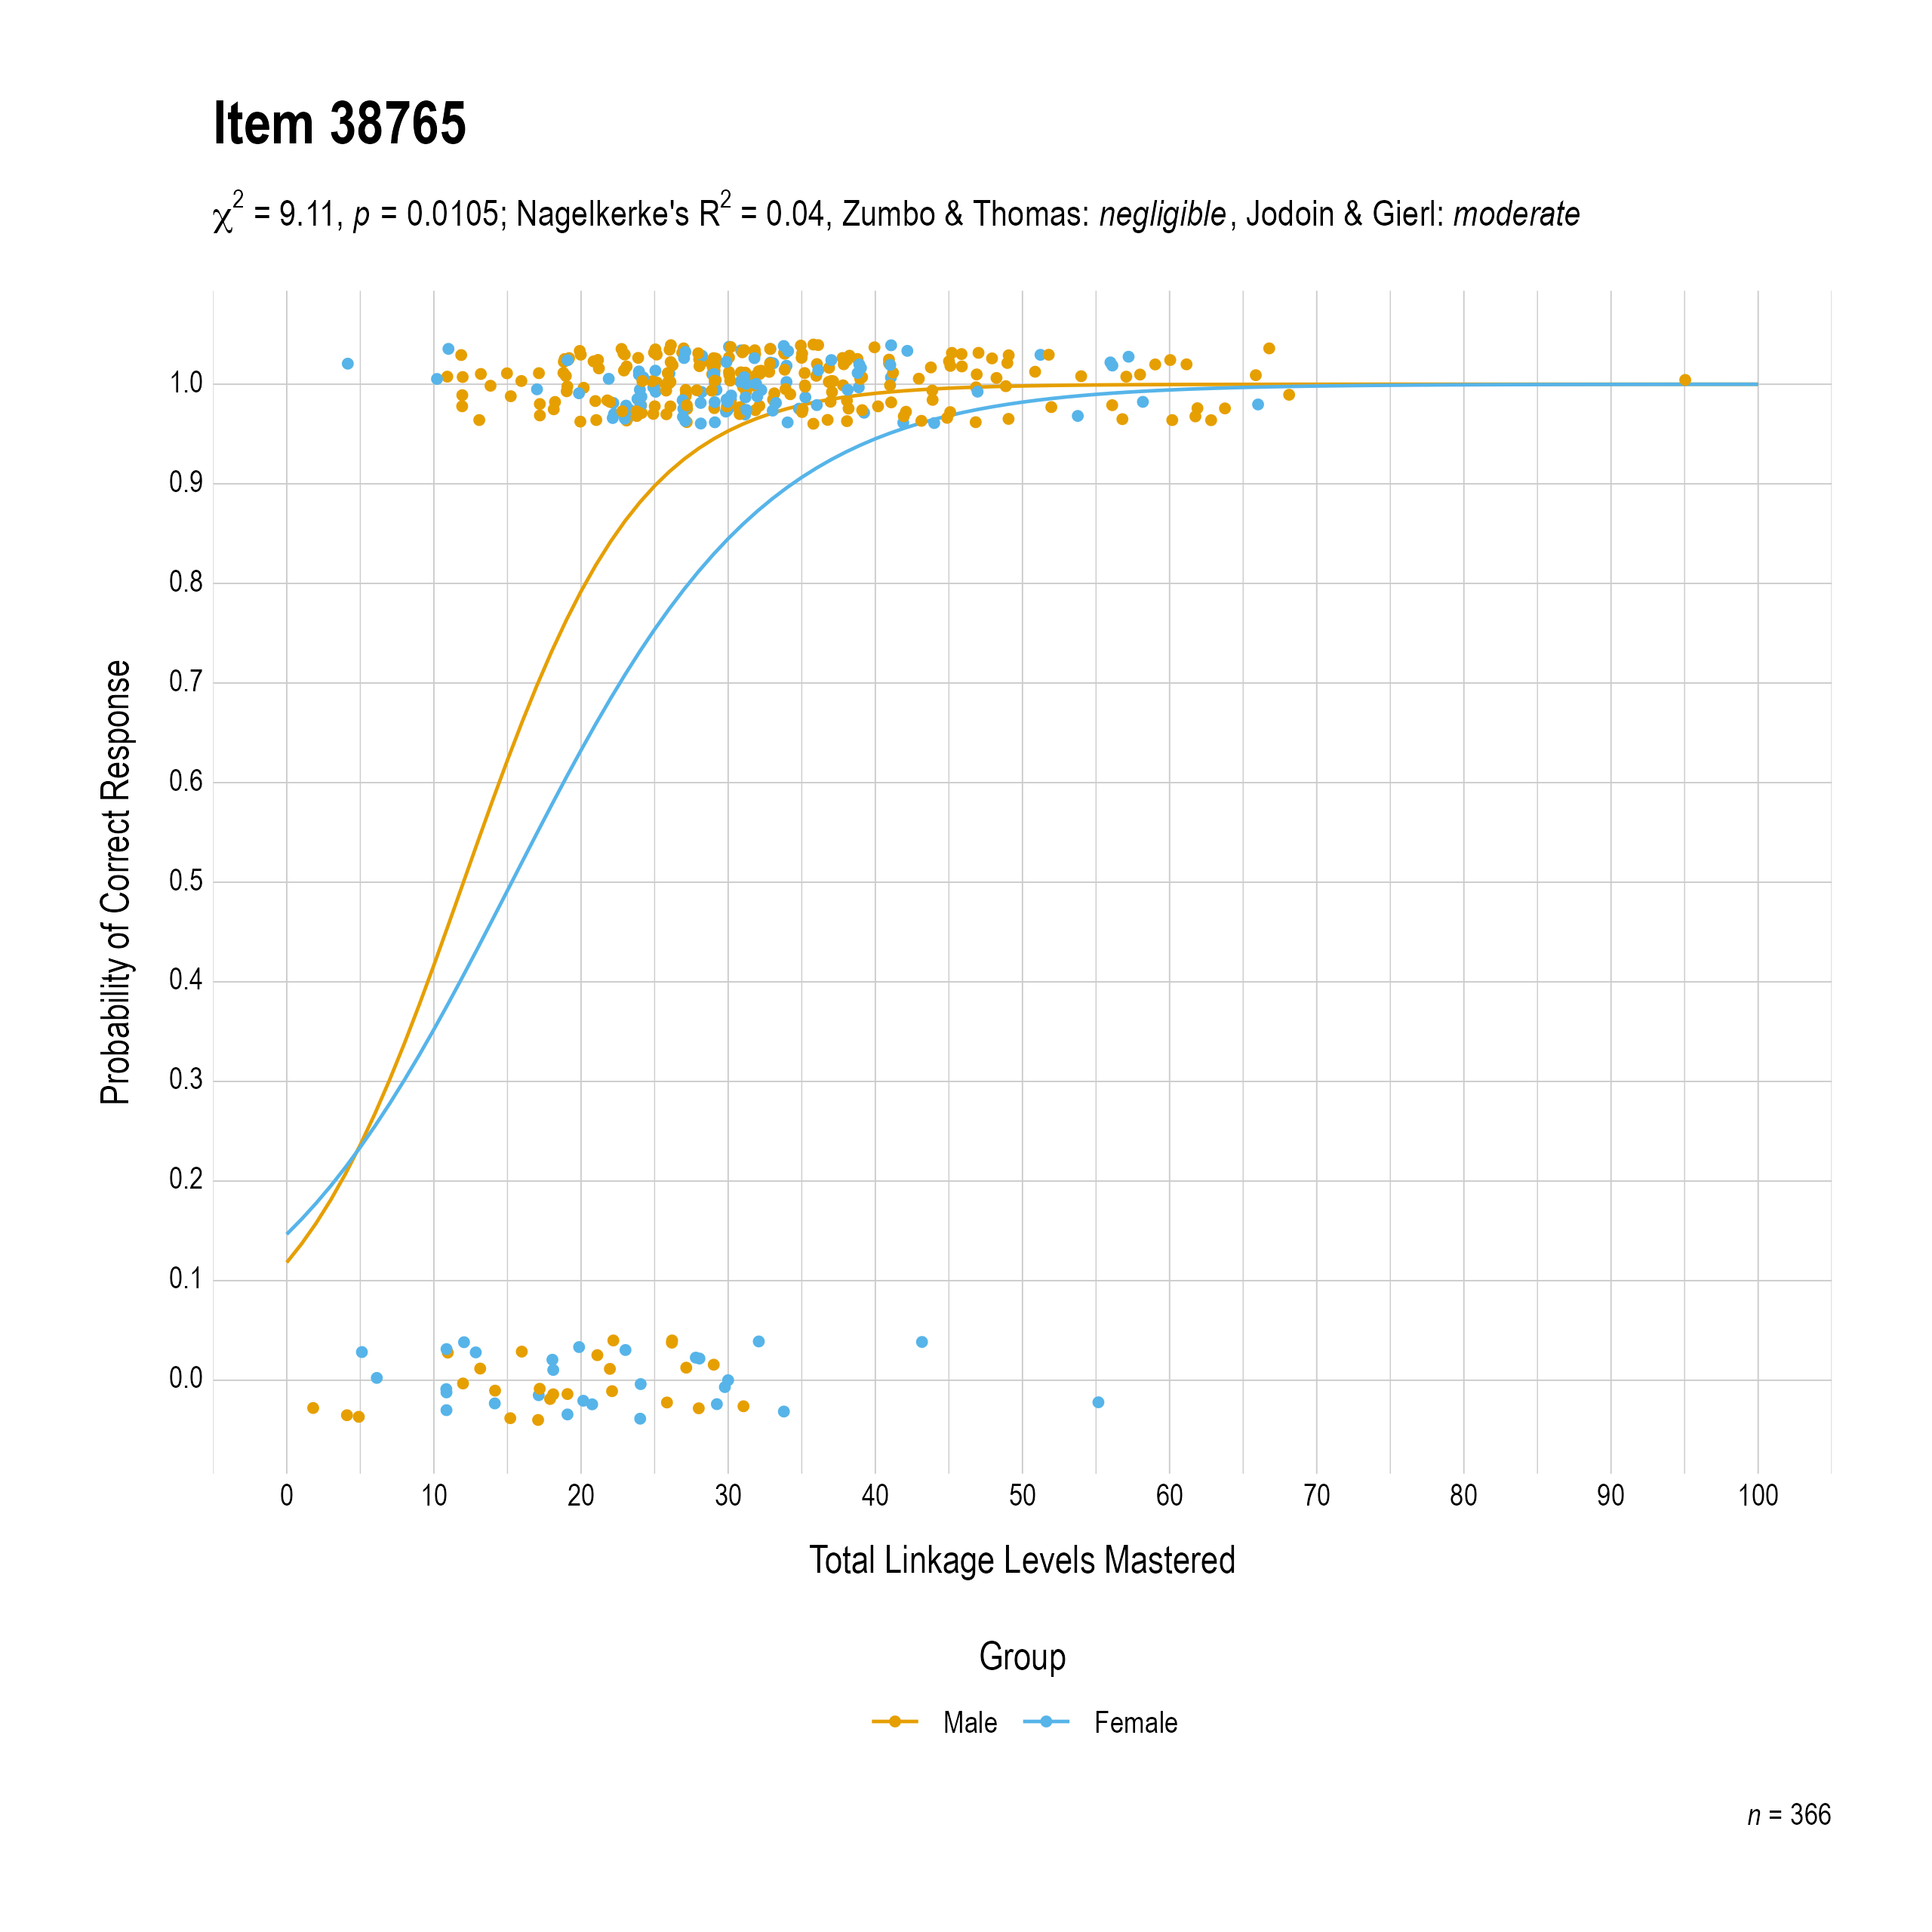 The plot of the combined gender differential item function evidence for English language arts item 38765. The figure contains points shaded by group. The figure also contains a logistic regression curve for each group. The total linkage levels mastered in is on the x-axis, and the probability of a correct response is on the y-axis.